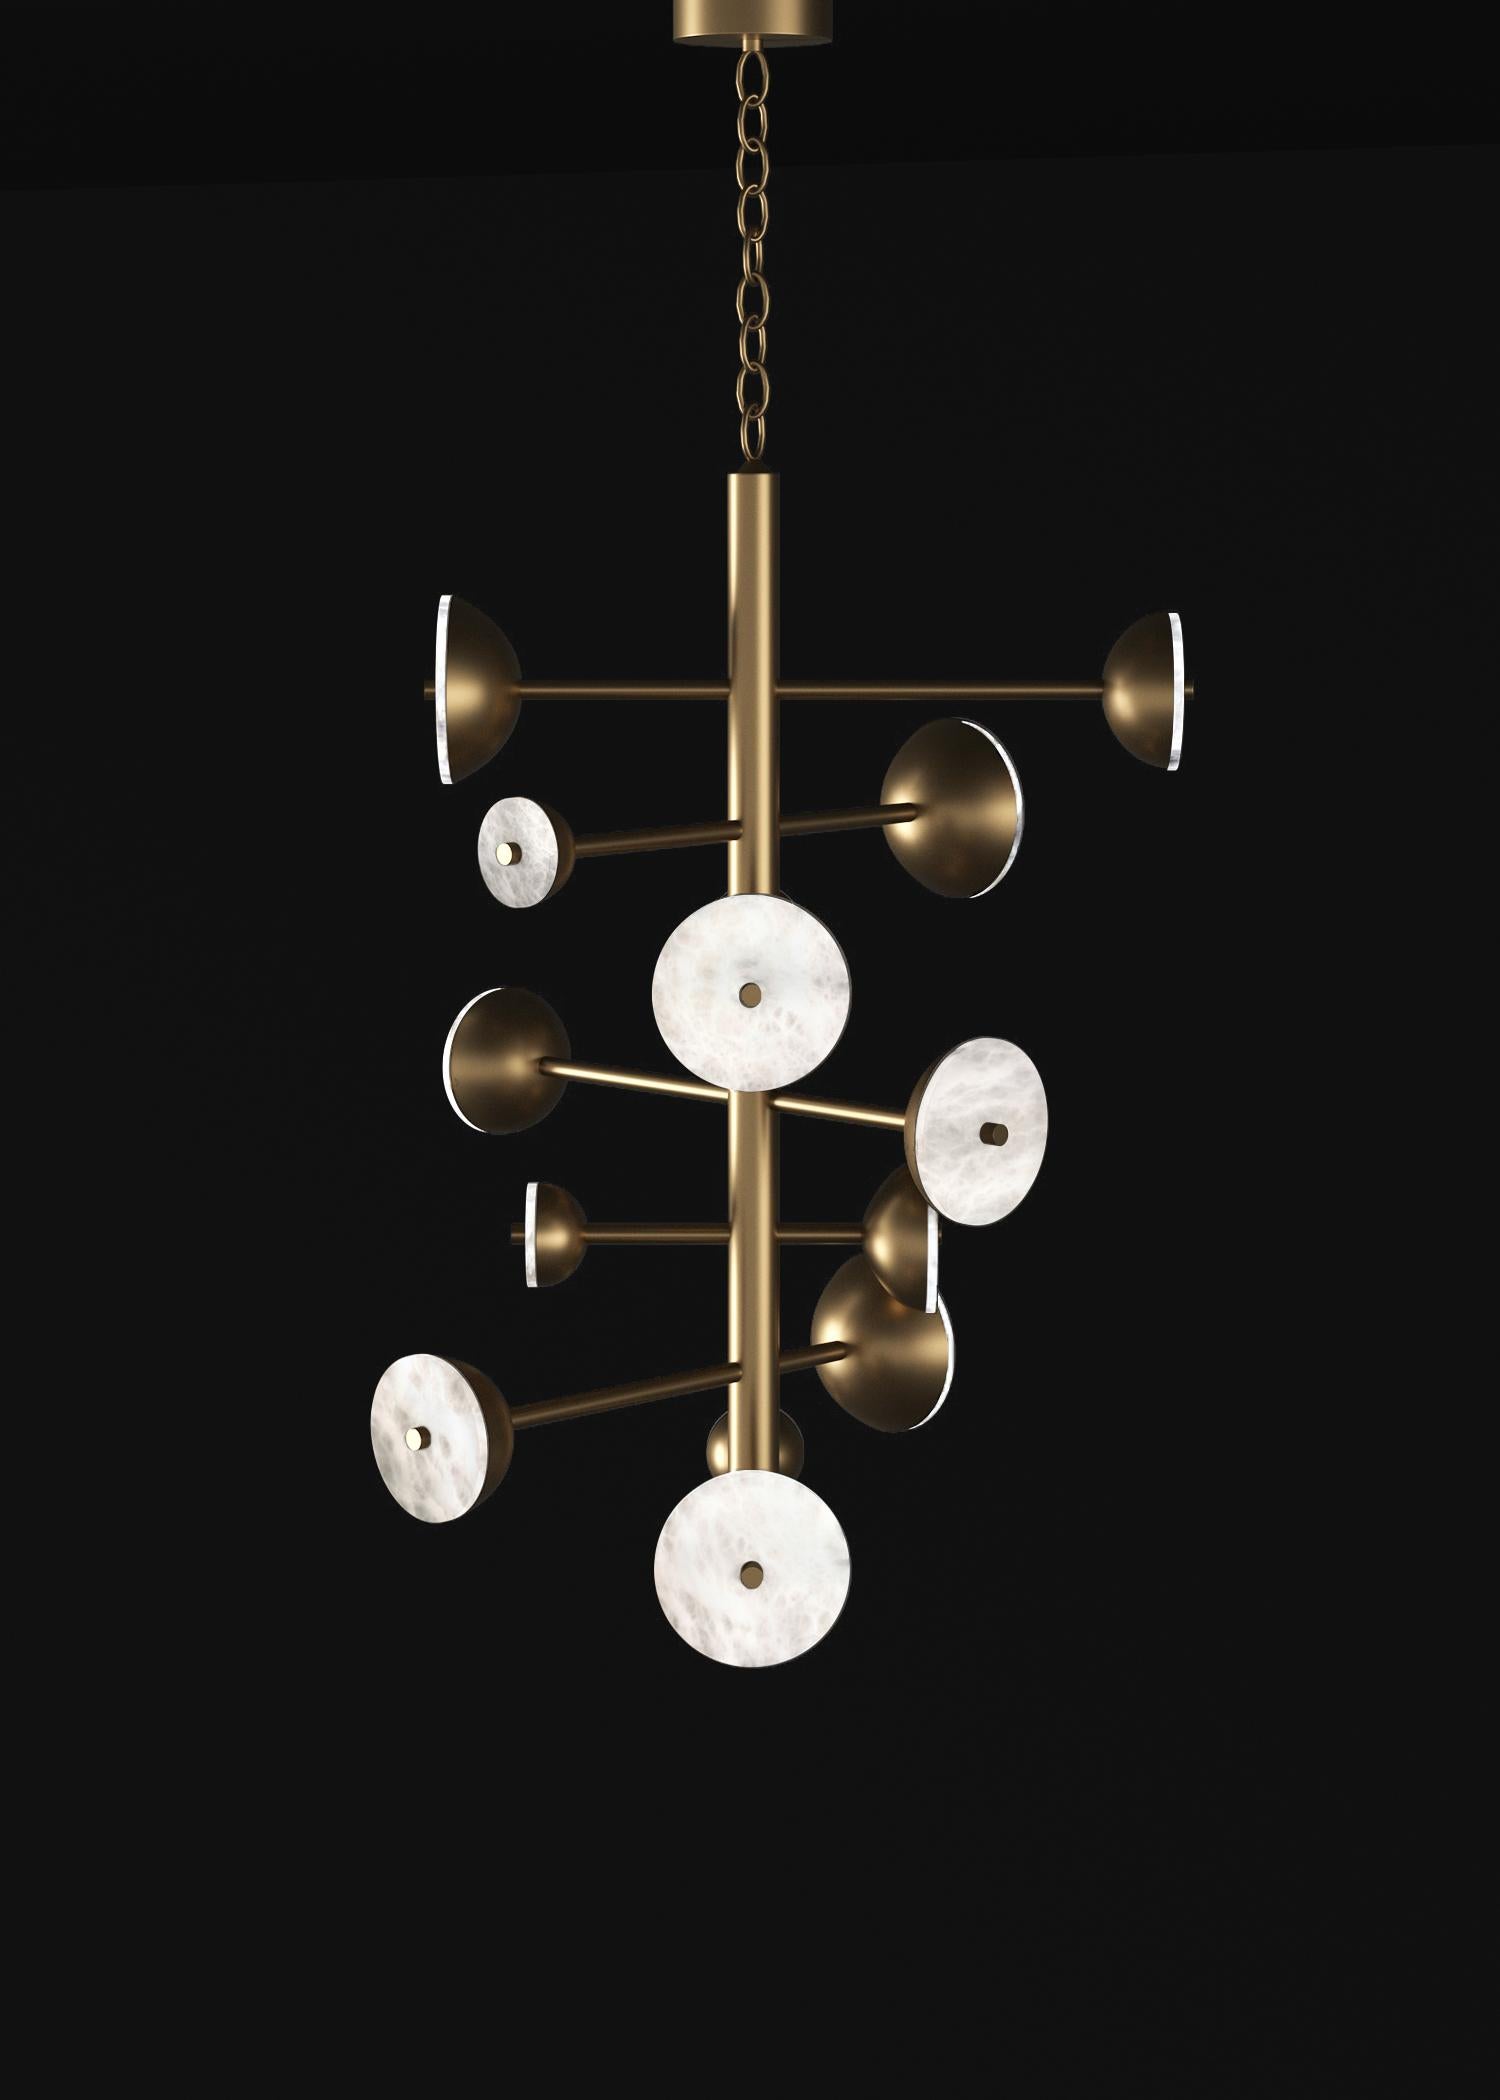 Teti Bronze Chandelier by Alabastro Italiano
Dimensions: D 74,5 x W 77,5 x H 110 cm.
Materials: White alabaster and bronze.

Available in different finishes: Shiny Silver, Bronze, Brushed Brass, Ruggine of Florence, Brushed Burnished, Shiny Gold,